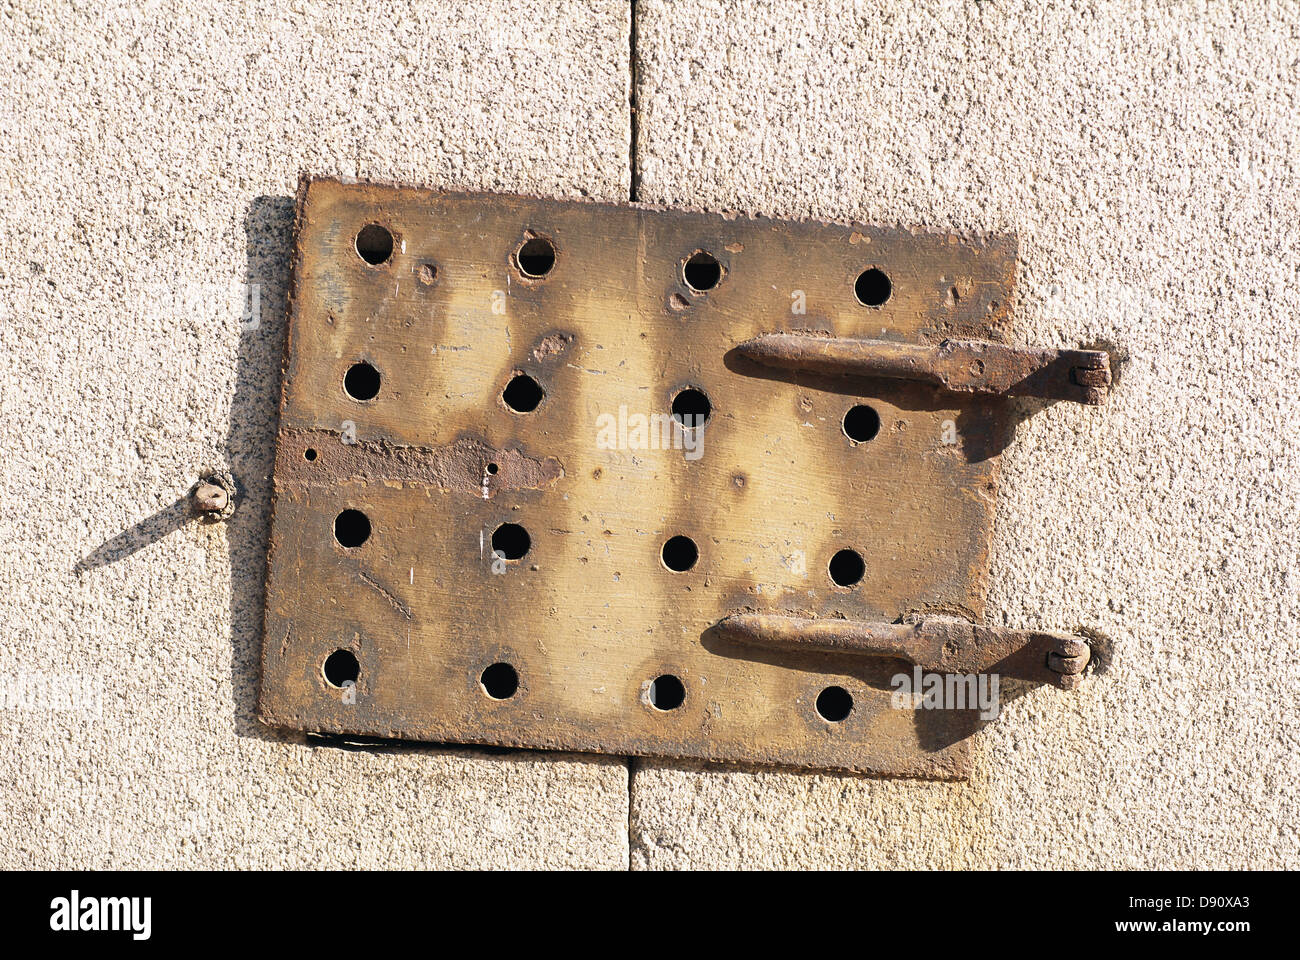 Metal sheet bolted on wall, close-up Stock Photo